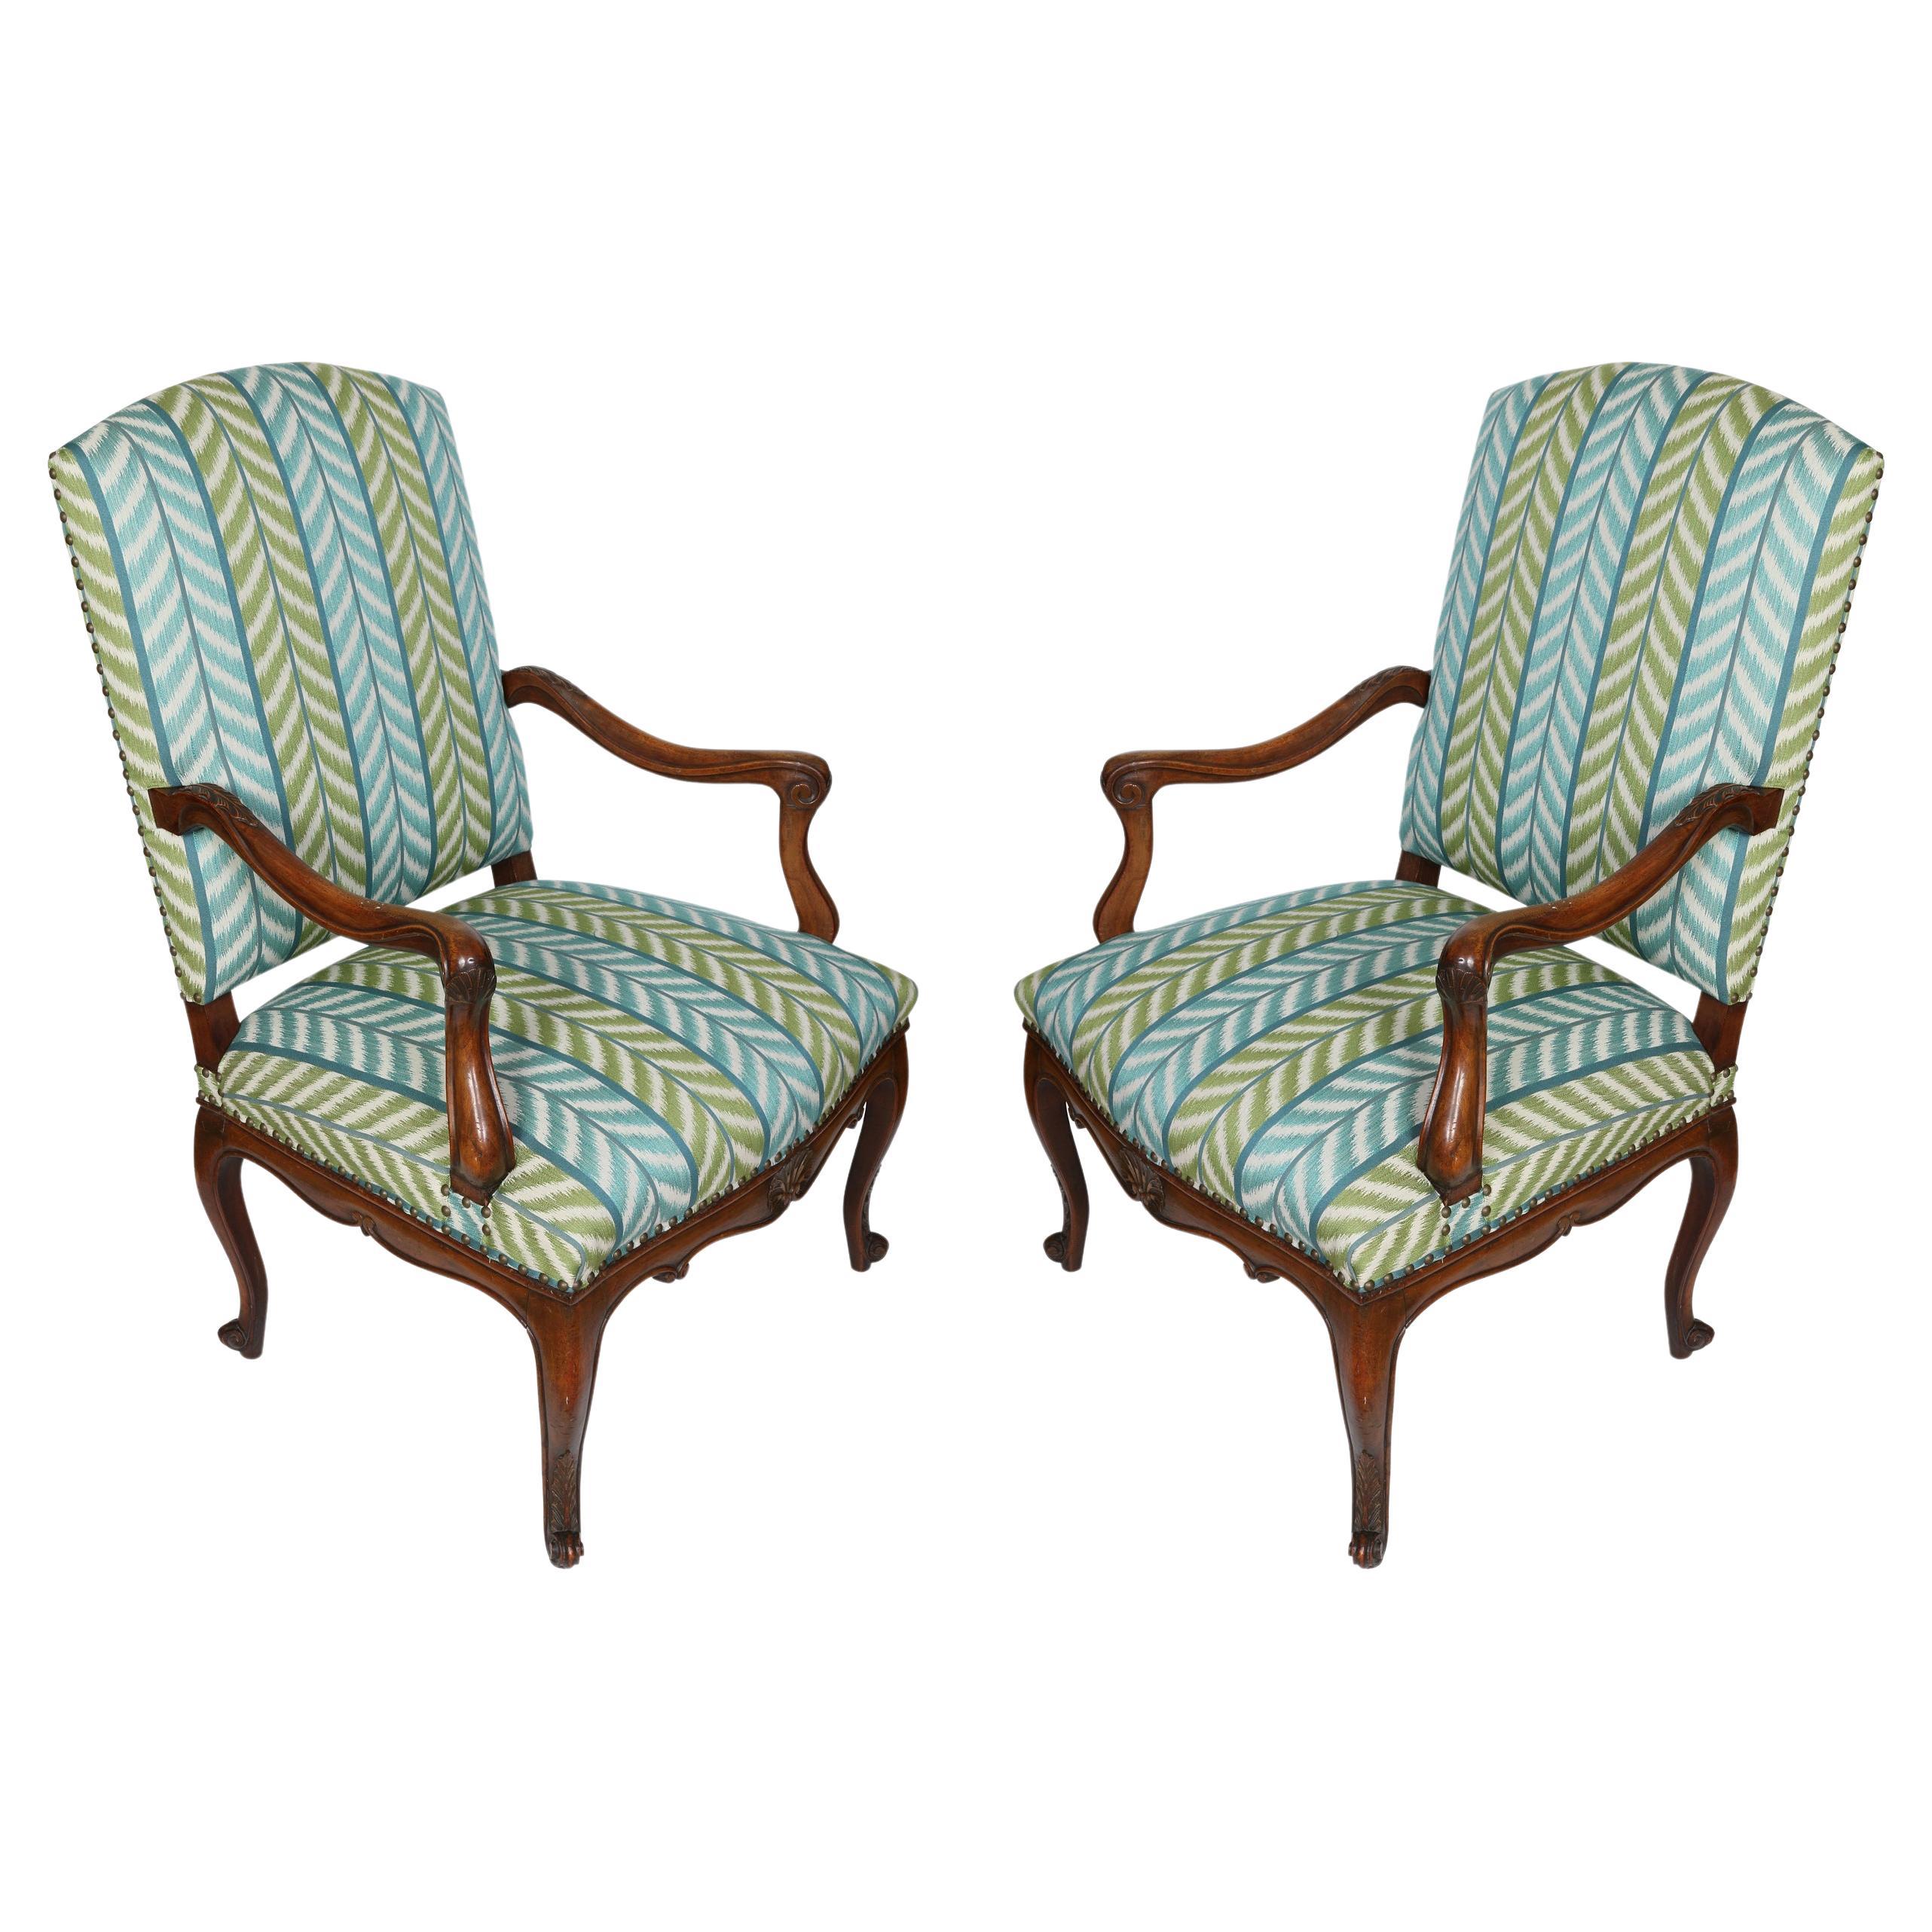 Pair of Walnut Regence Chairs With Quadrille Blue and Green Chevron Upholstery For Sale